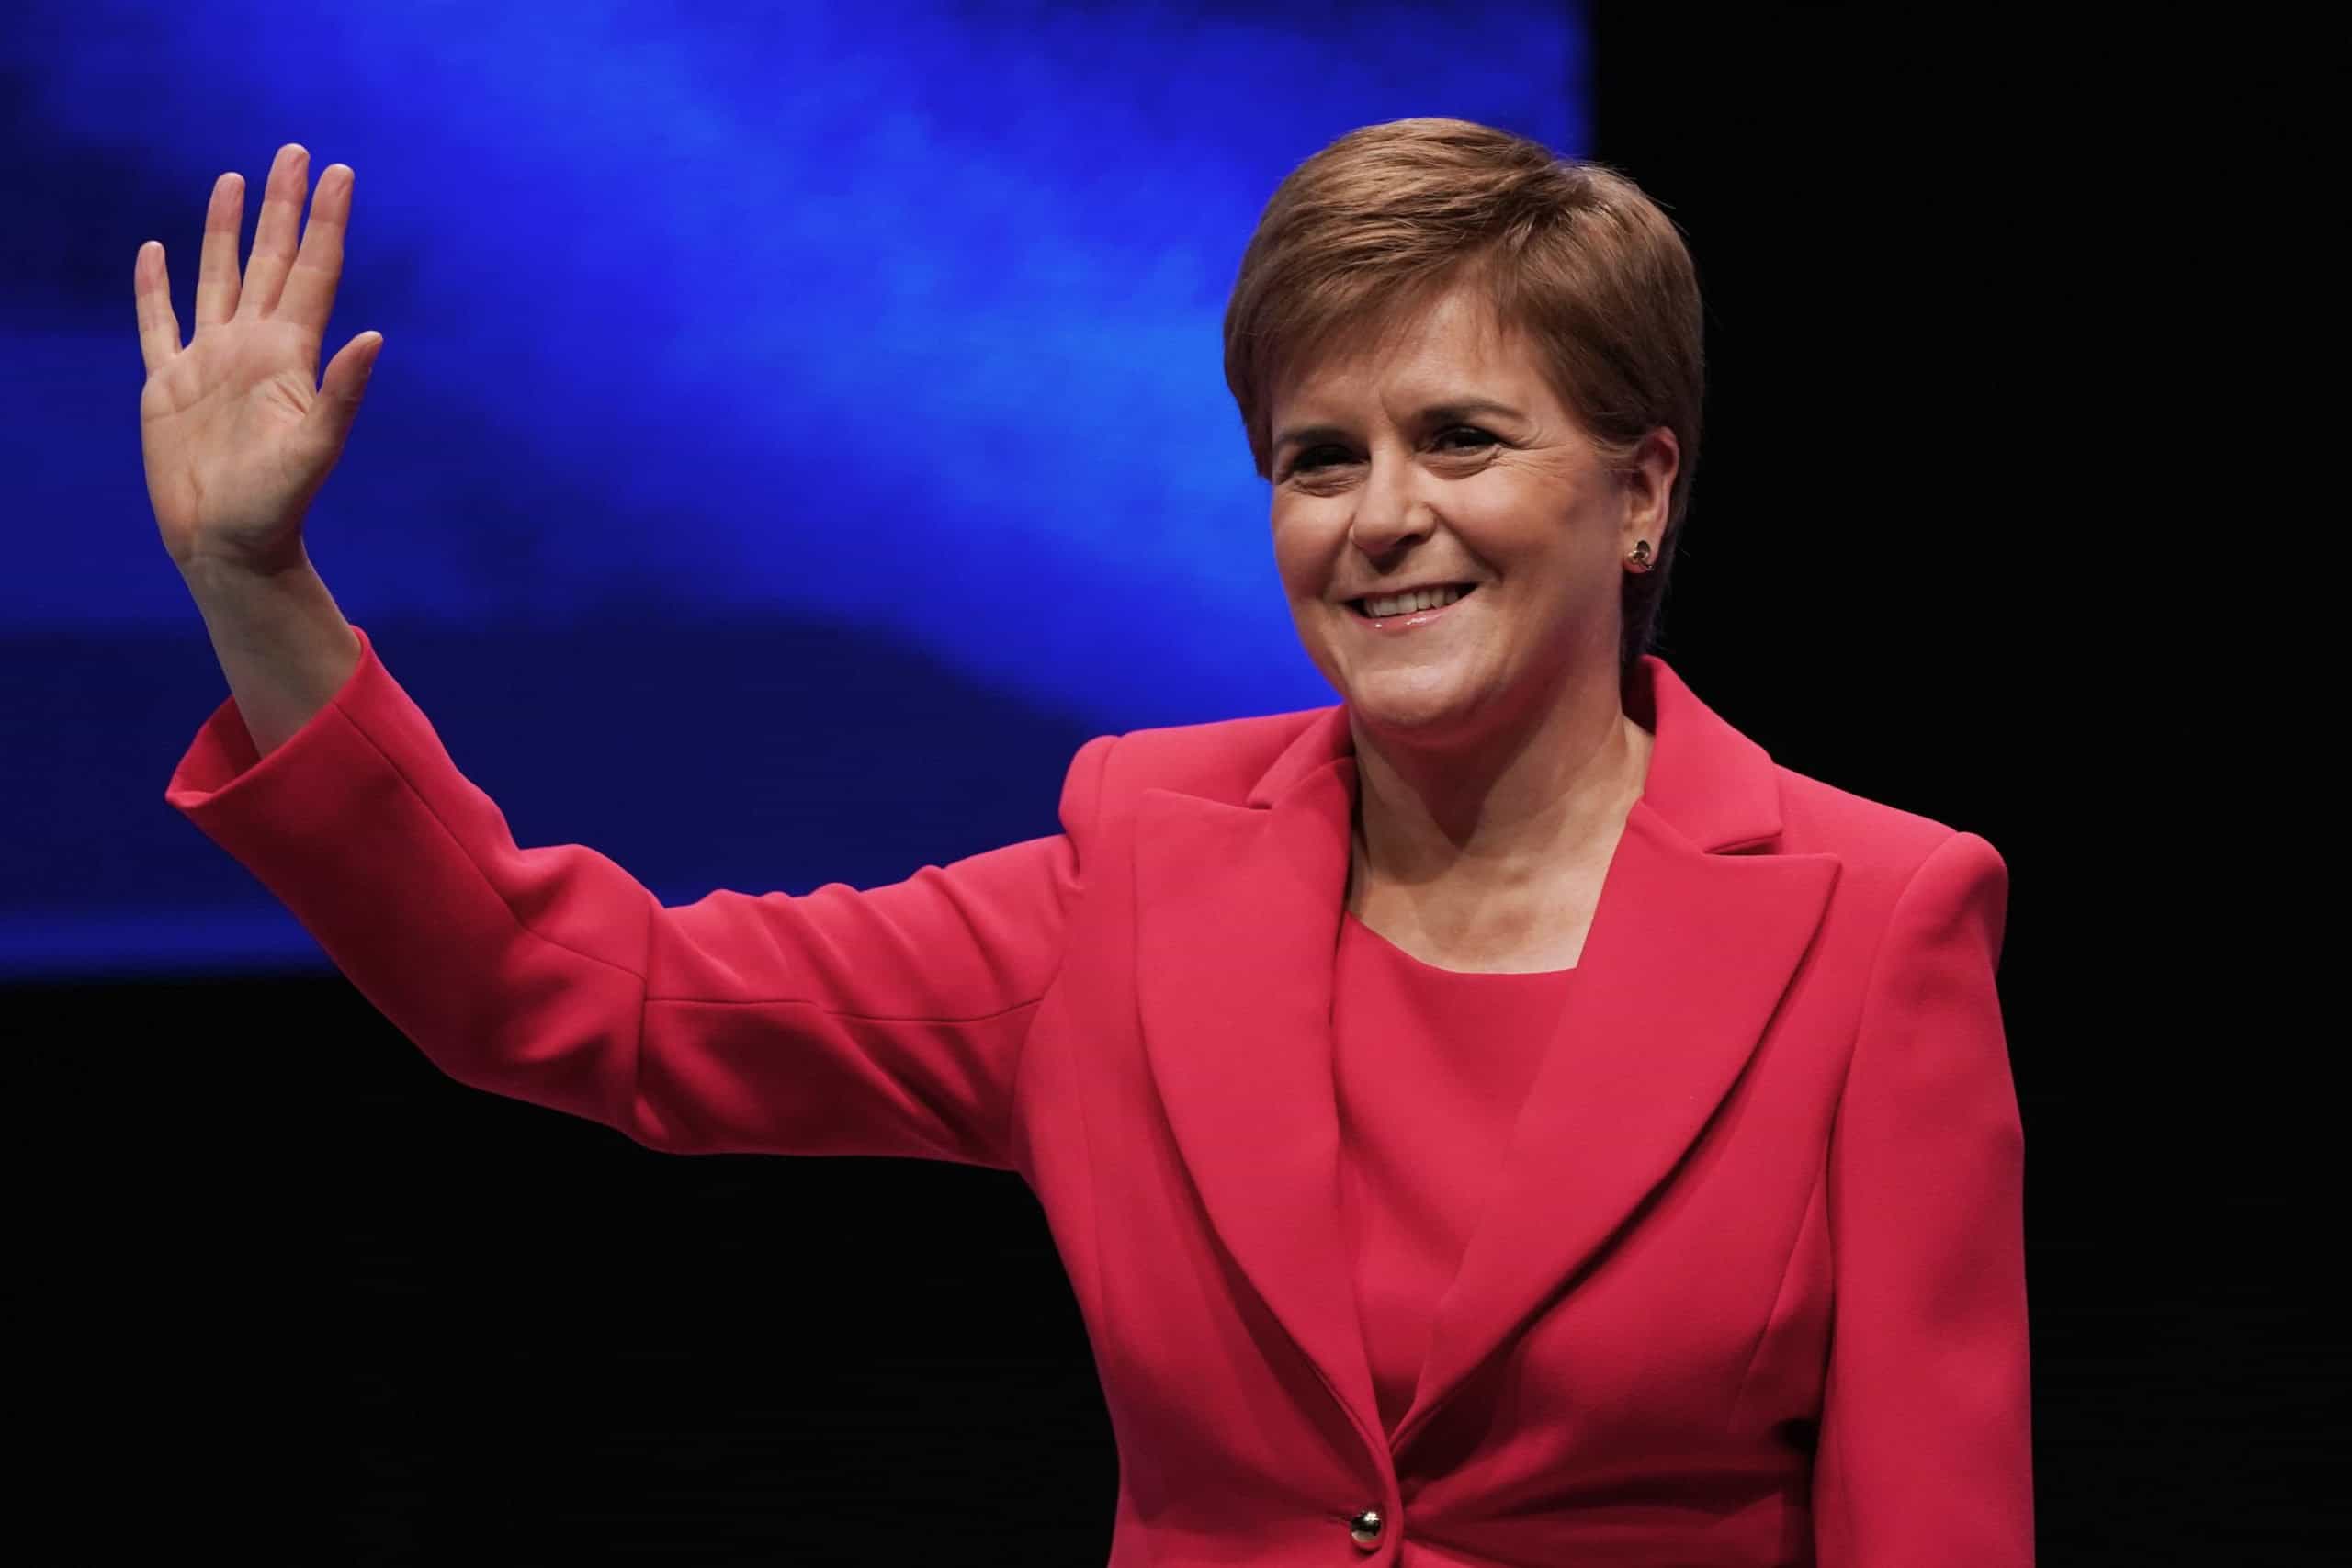 Praise pours in for Sturgeon’s ‘brilliant’ conference speech